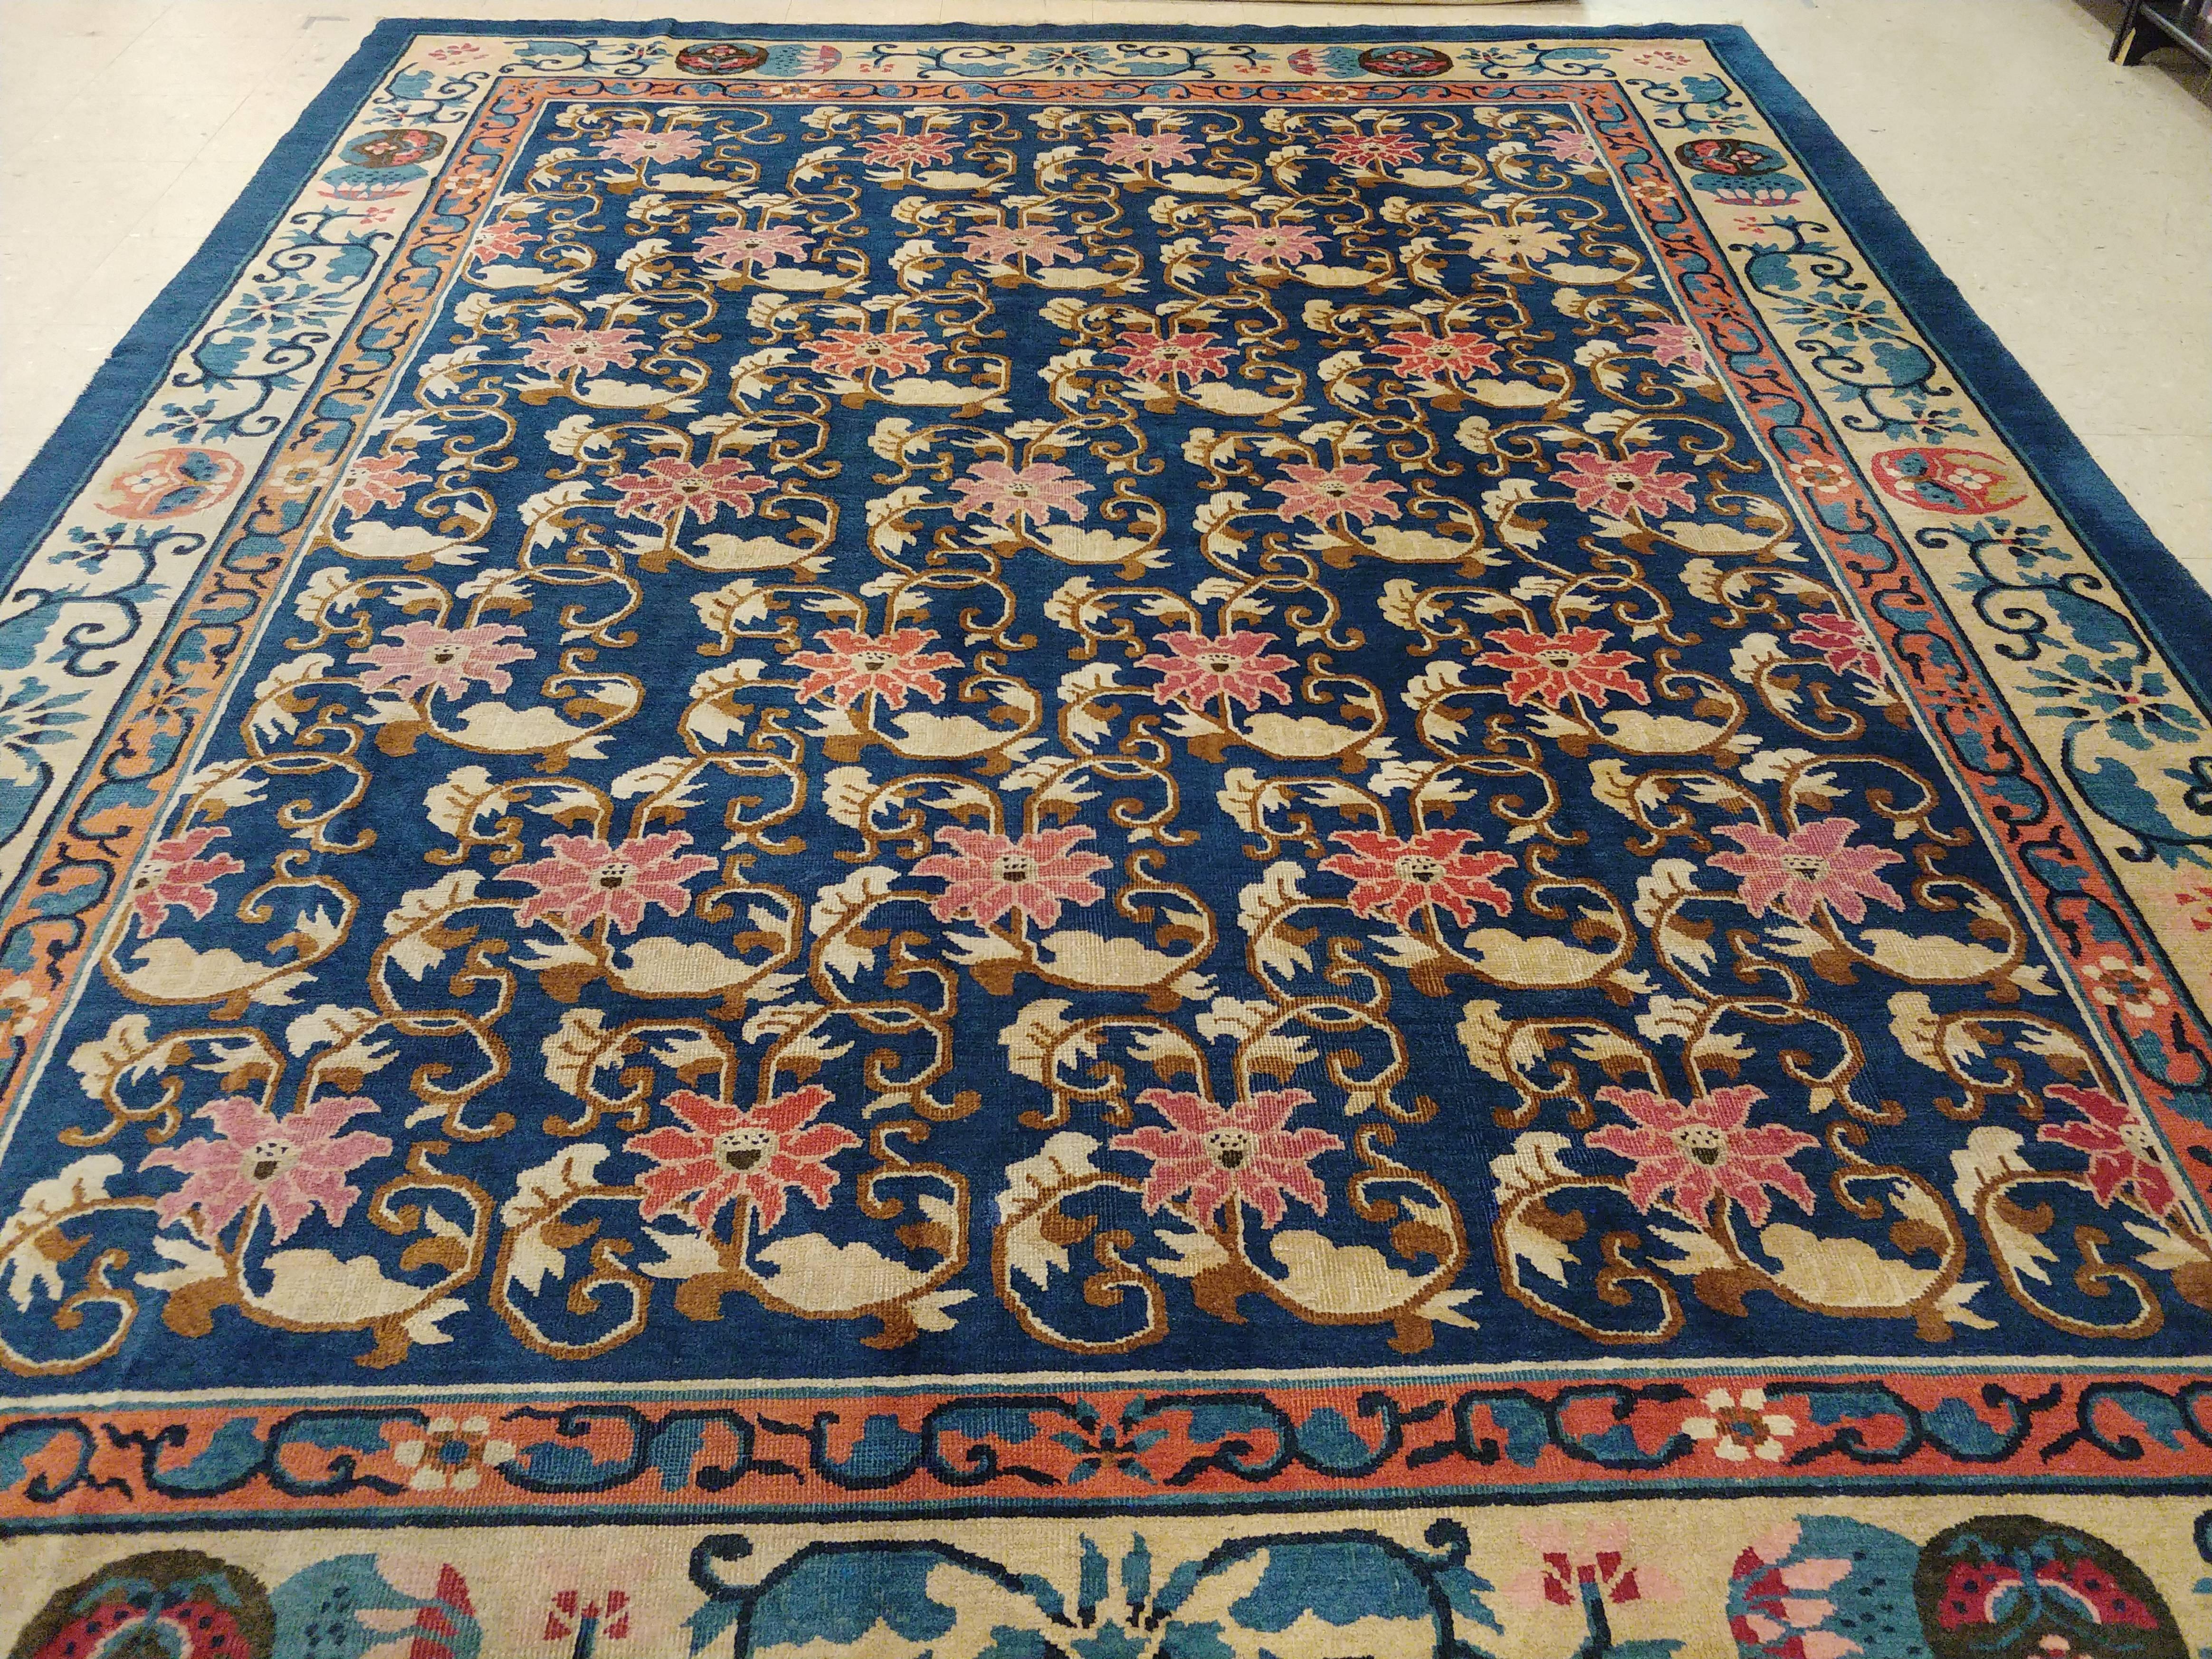 Antique Chinese carpets were woven in classical Chinese patterns, with their fret borders, shou medallions and other far-eastern motifs. These carpets, however, are bolder and simpler, course of weave. Most fine Chinese rugs have a high percentage